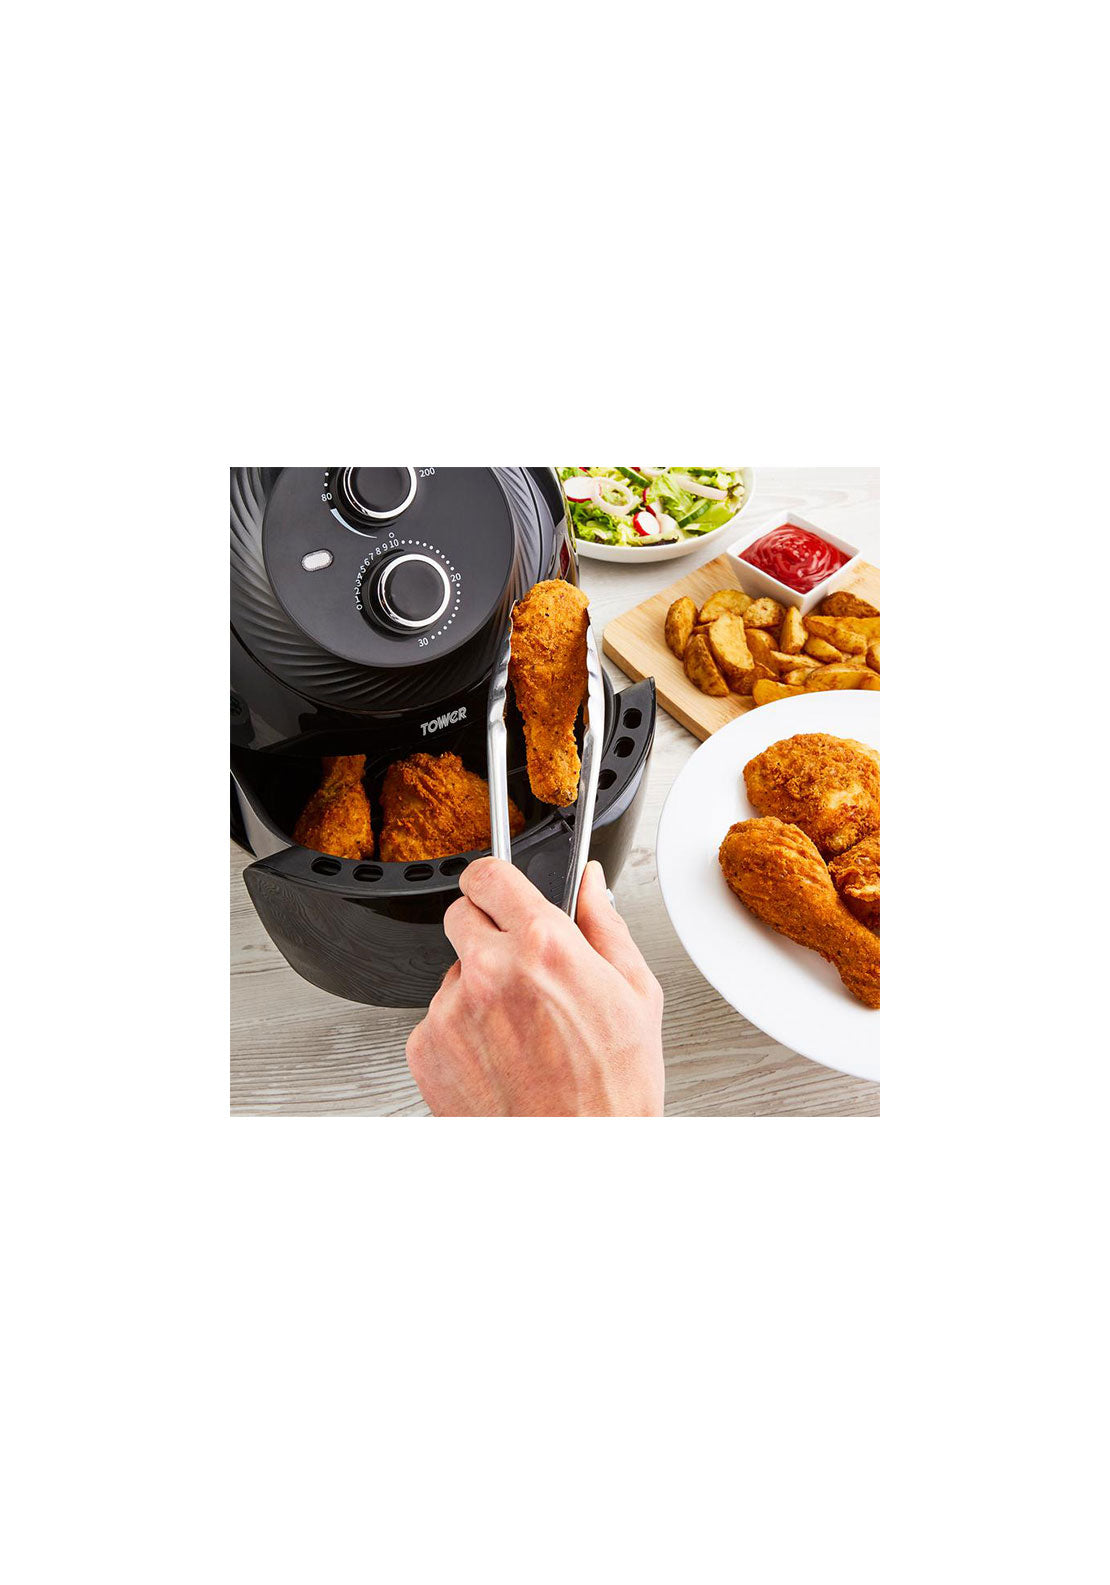 Tower Vortx 4L Manual Air Fryer | T17082 7 Shaws Department Stores